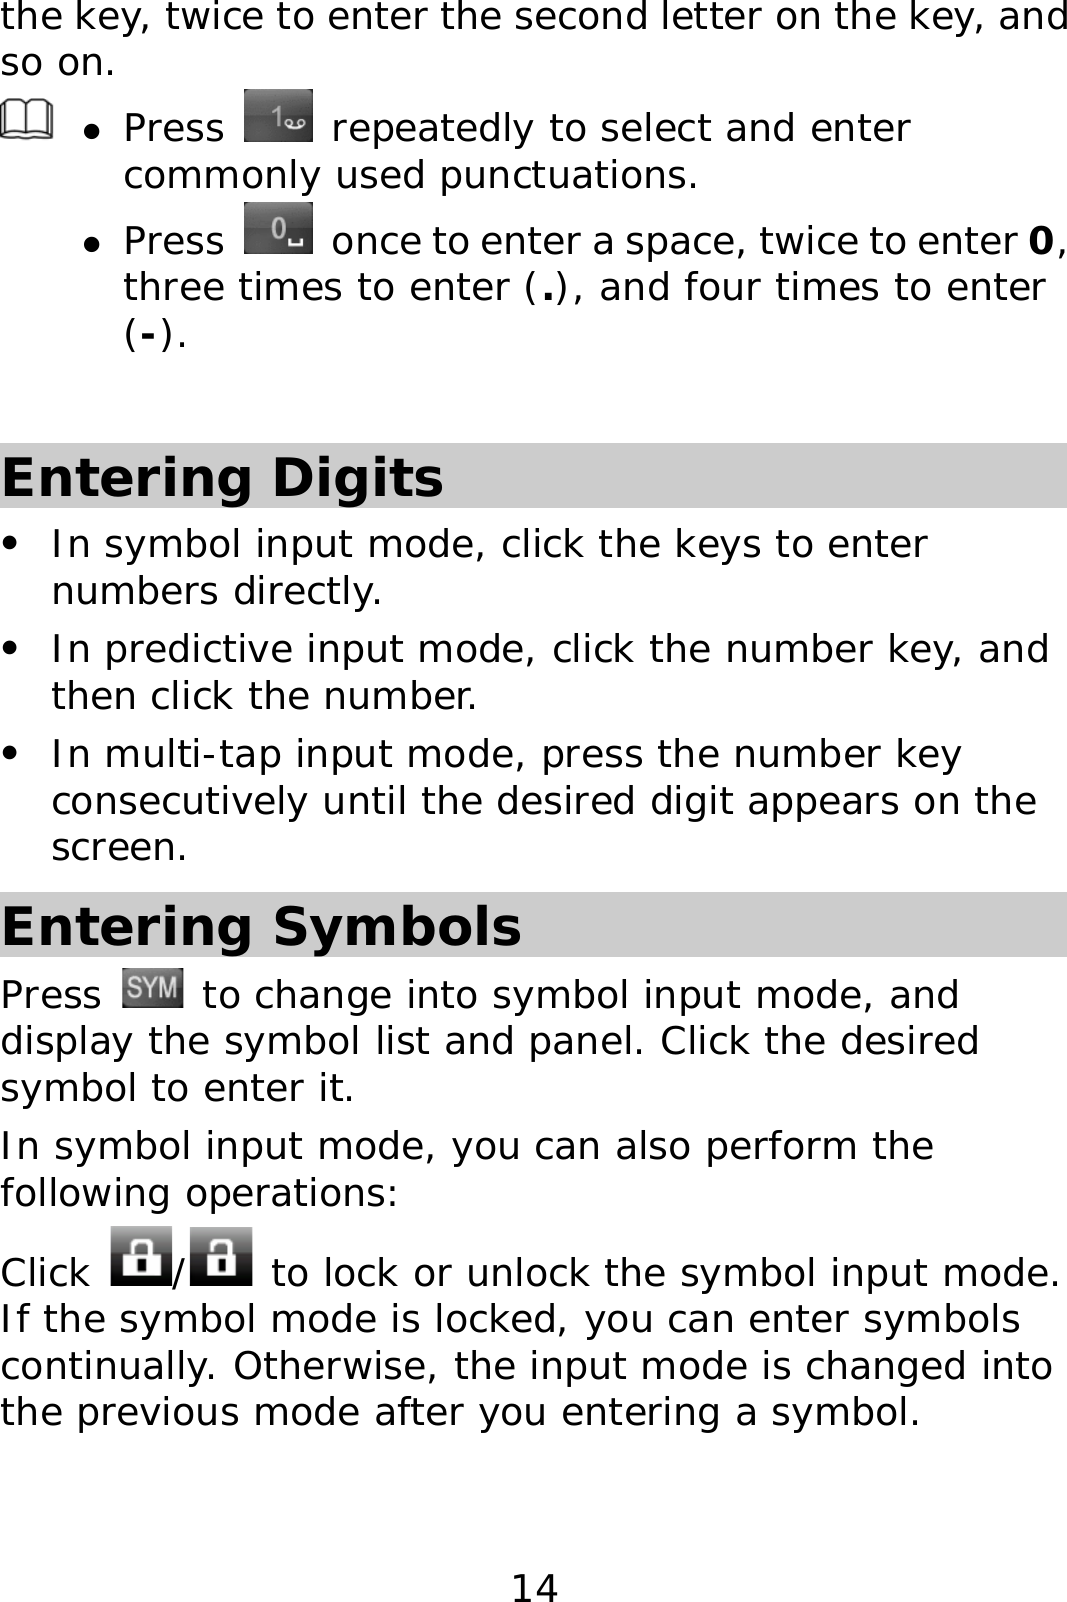 14 the key, twice to enter the second letter on the key, and so on.   z Press   repeatedly to select and enter commonly used punctuations. z Press    once to enter a space, twice to enter 0, three times to enter (.), and four times to enter (-).  Entering Digits z In symbol input mode, click the keys to enter numbers directly. z In predictive input mode, click the number key, and then click the number. z In multi-tap input mode, press the number key consecutively until the desired digit appears on the screen. Entering Symbols Press   to change into symbol input mode, and display the symbol list and panel. Click the desired symbol to enter it. In symbol input mode, you can also perform the following operations:  Click  /  to lock or unlock the symbol input mode. If the symbol mode is locked, you can enter symbols continually. Otherwise, the input mode is changed into the previous mode after you entering a symbol.  